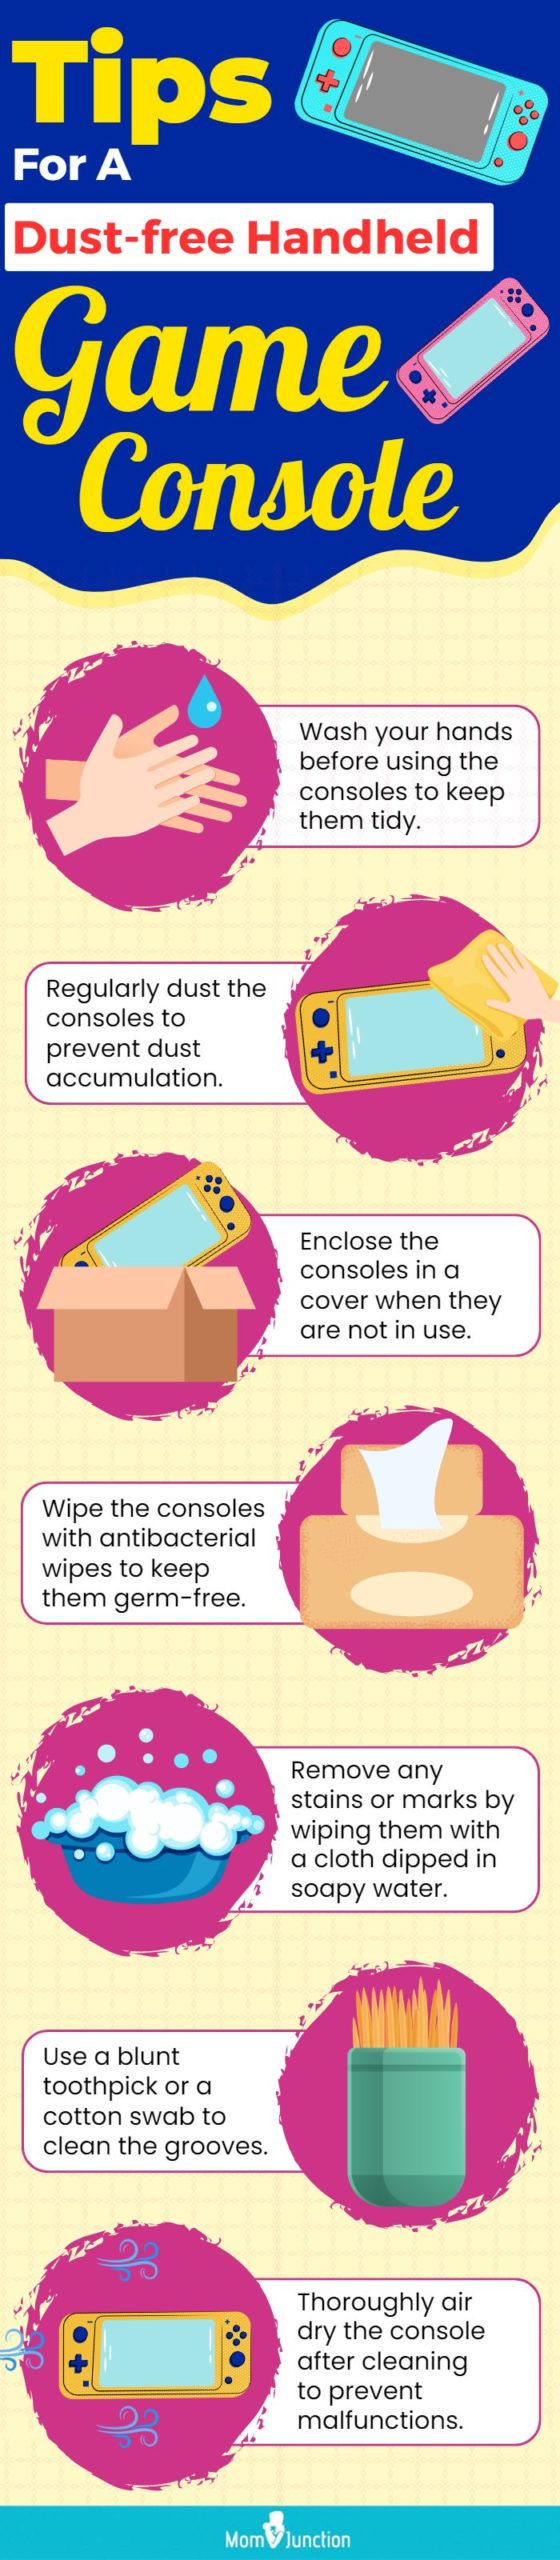 Tips For A Dust-free Handheld Game Console (infographic)